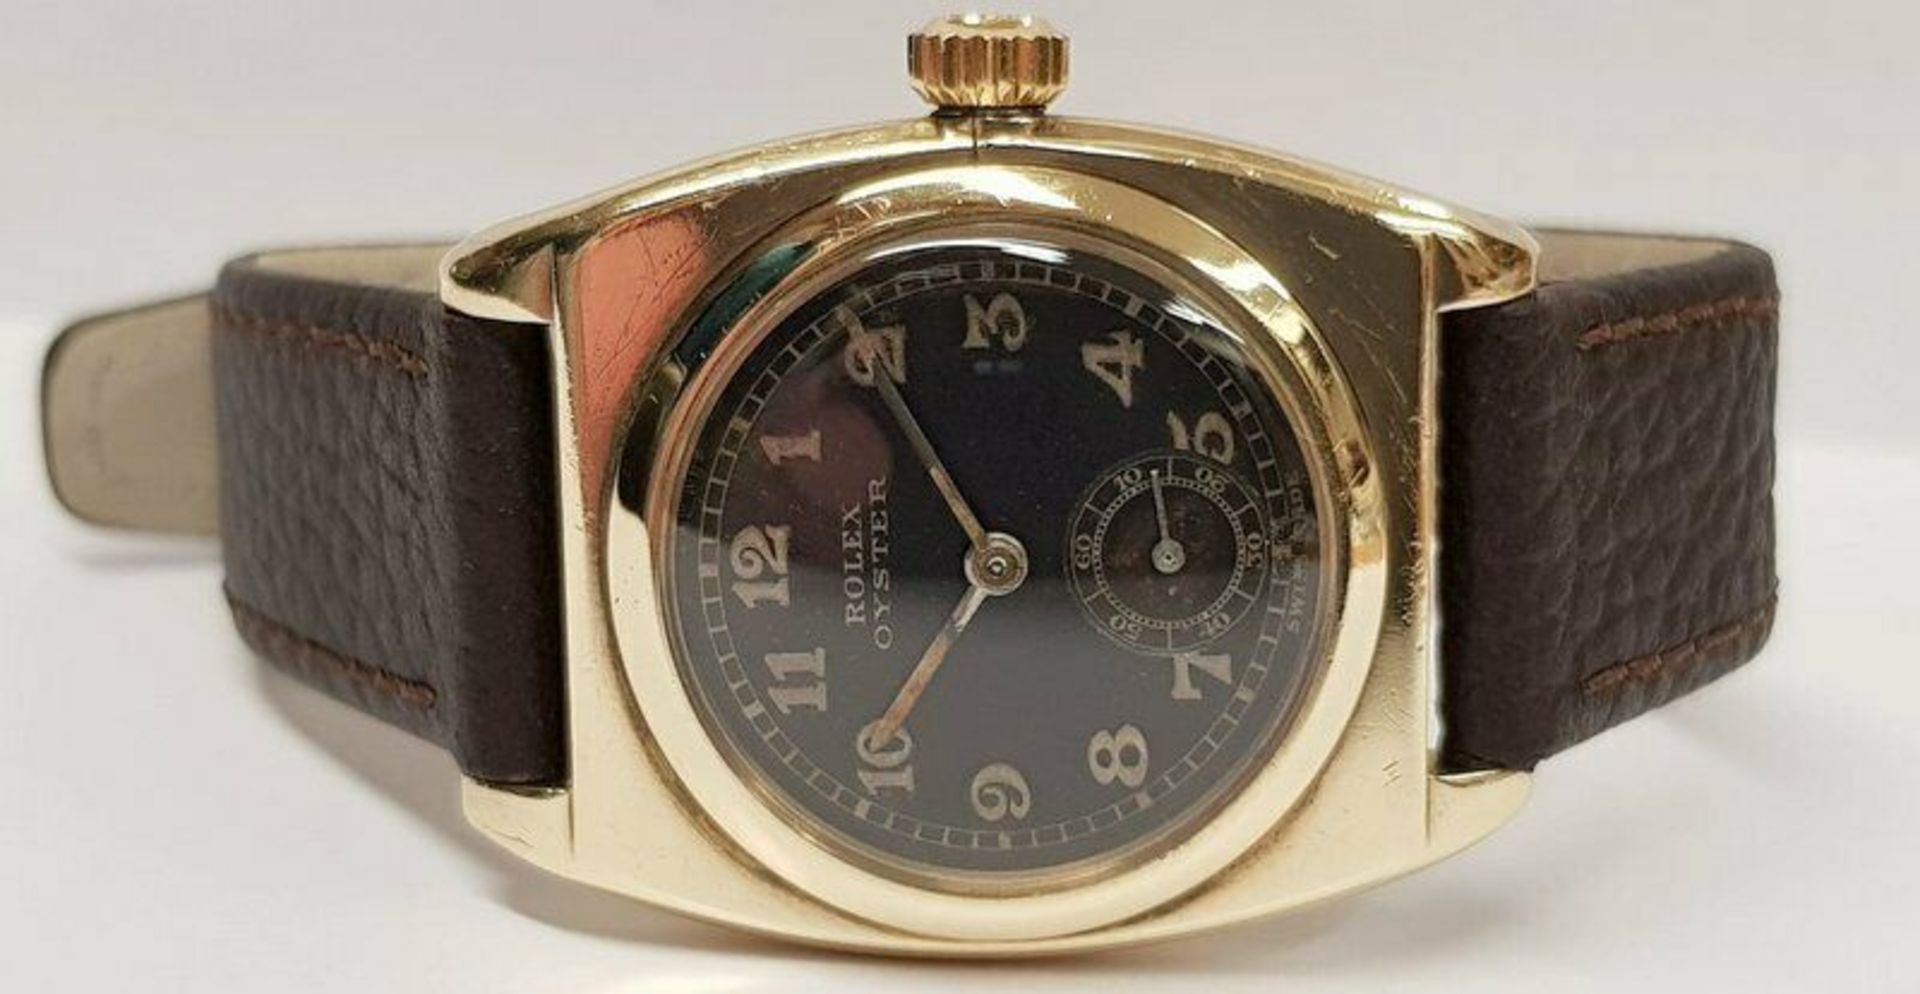 Rare Black Dial Rolex Oyster Viceroy 9ct Gold 1933 Chronometer